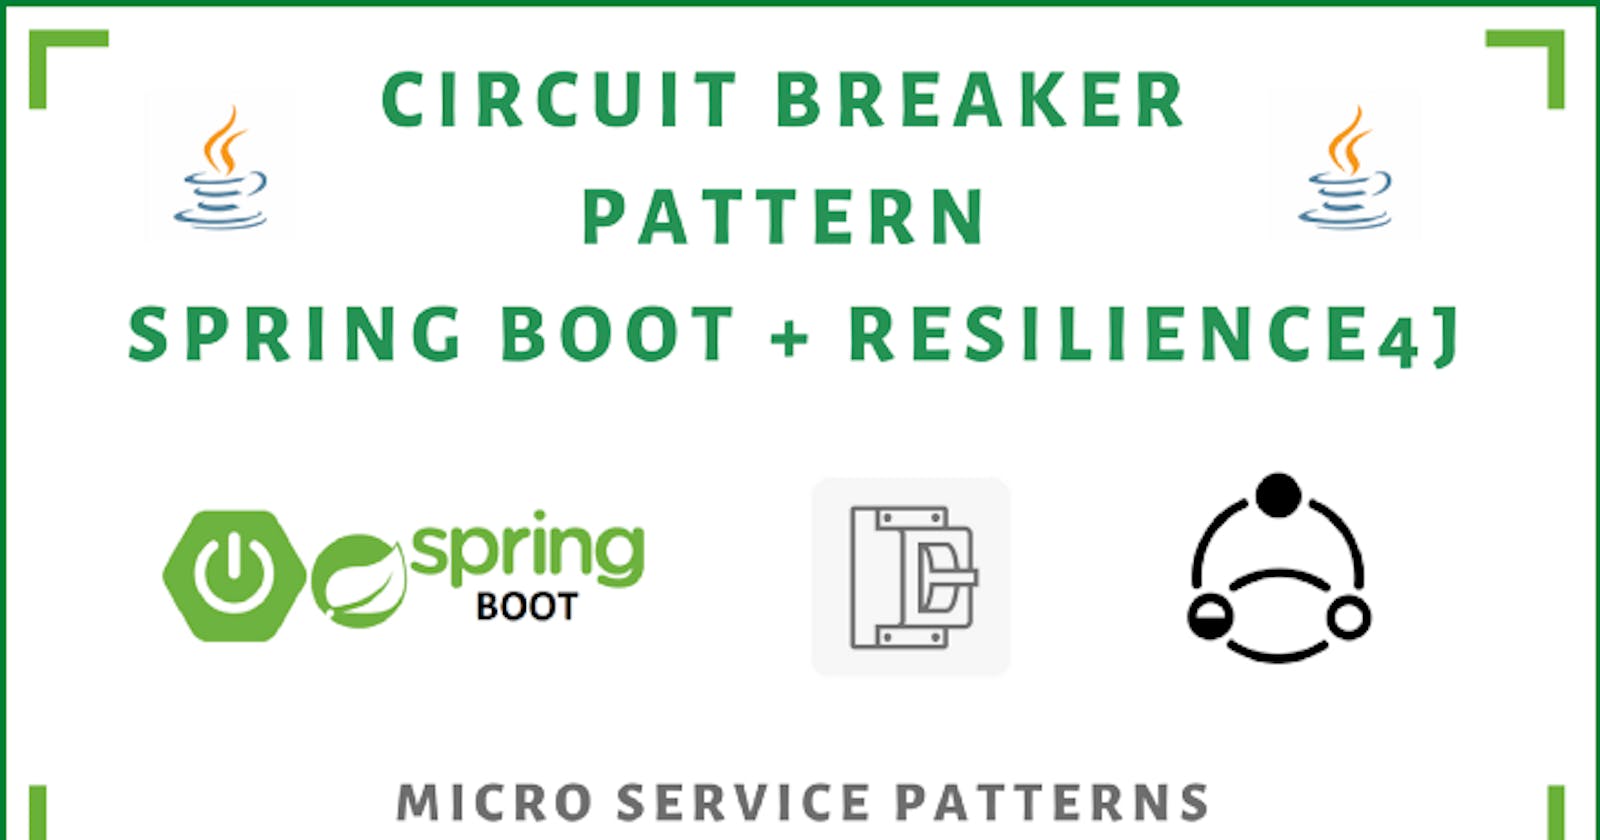 Micro Service Patterns: Circuit Breaker with Spring Boot